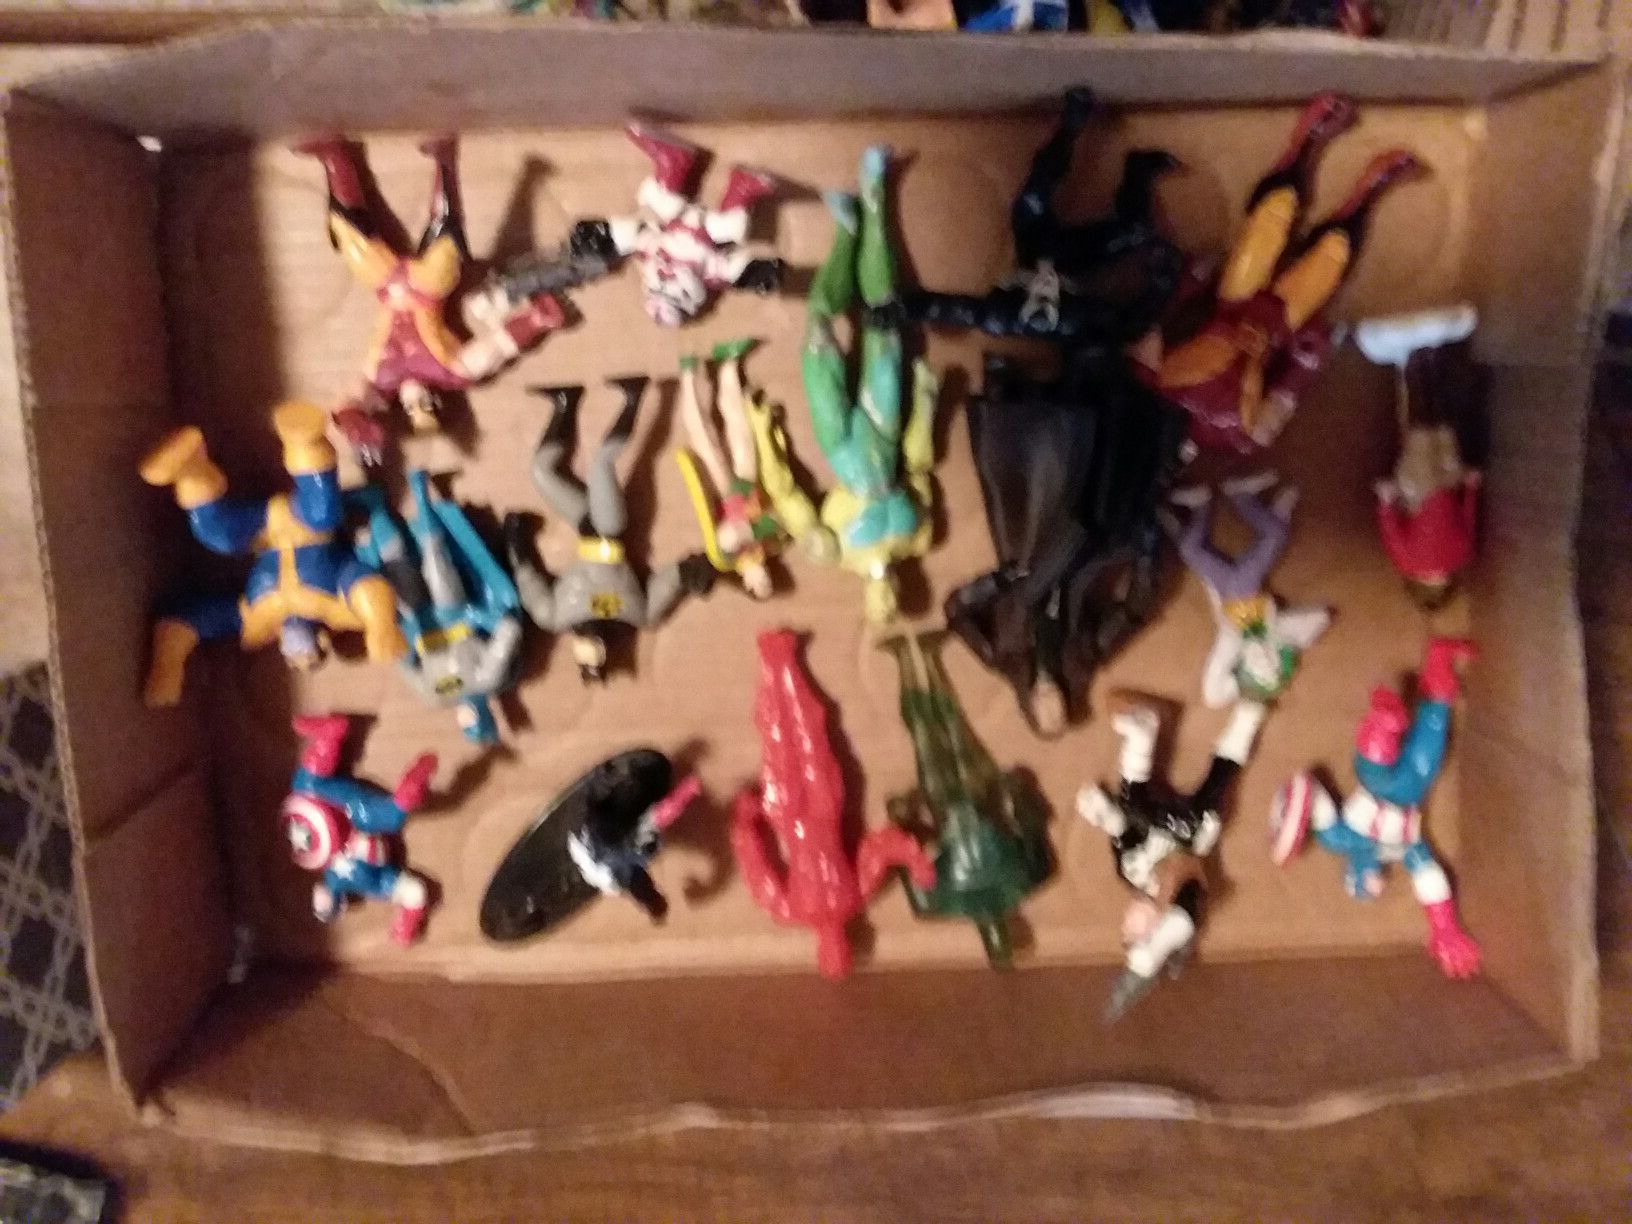 Action Figures over 50.